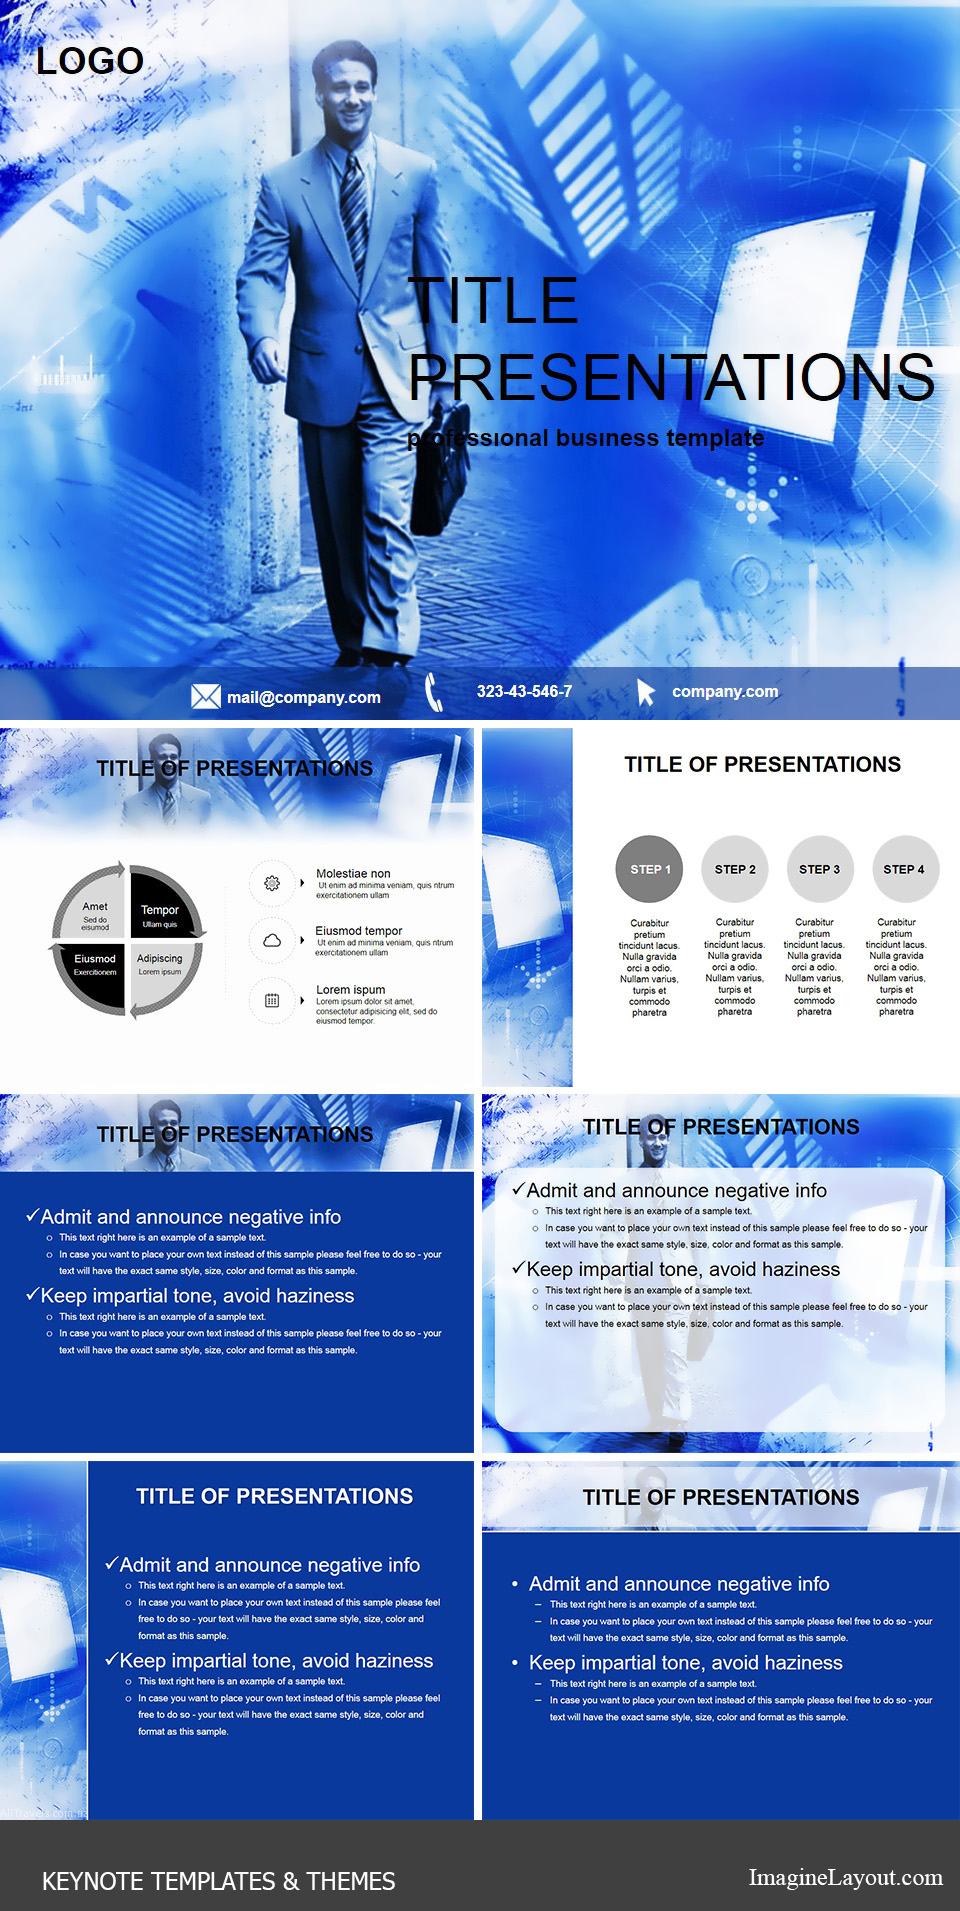 Professional Job Manager Keynote Template for Impactful Presentations